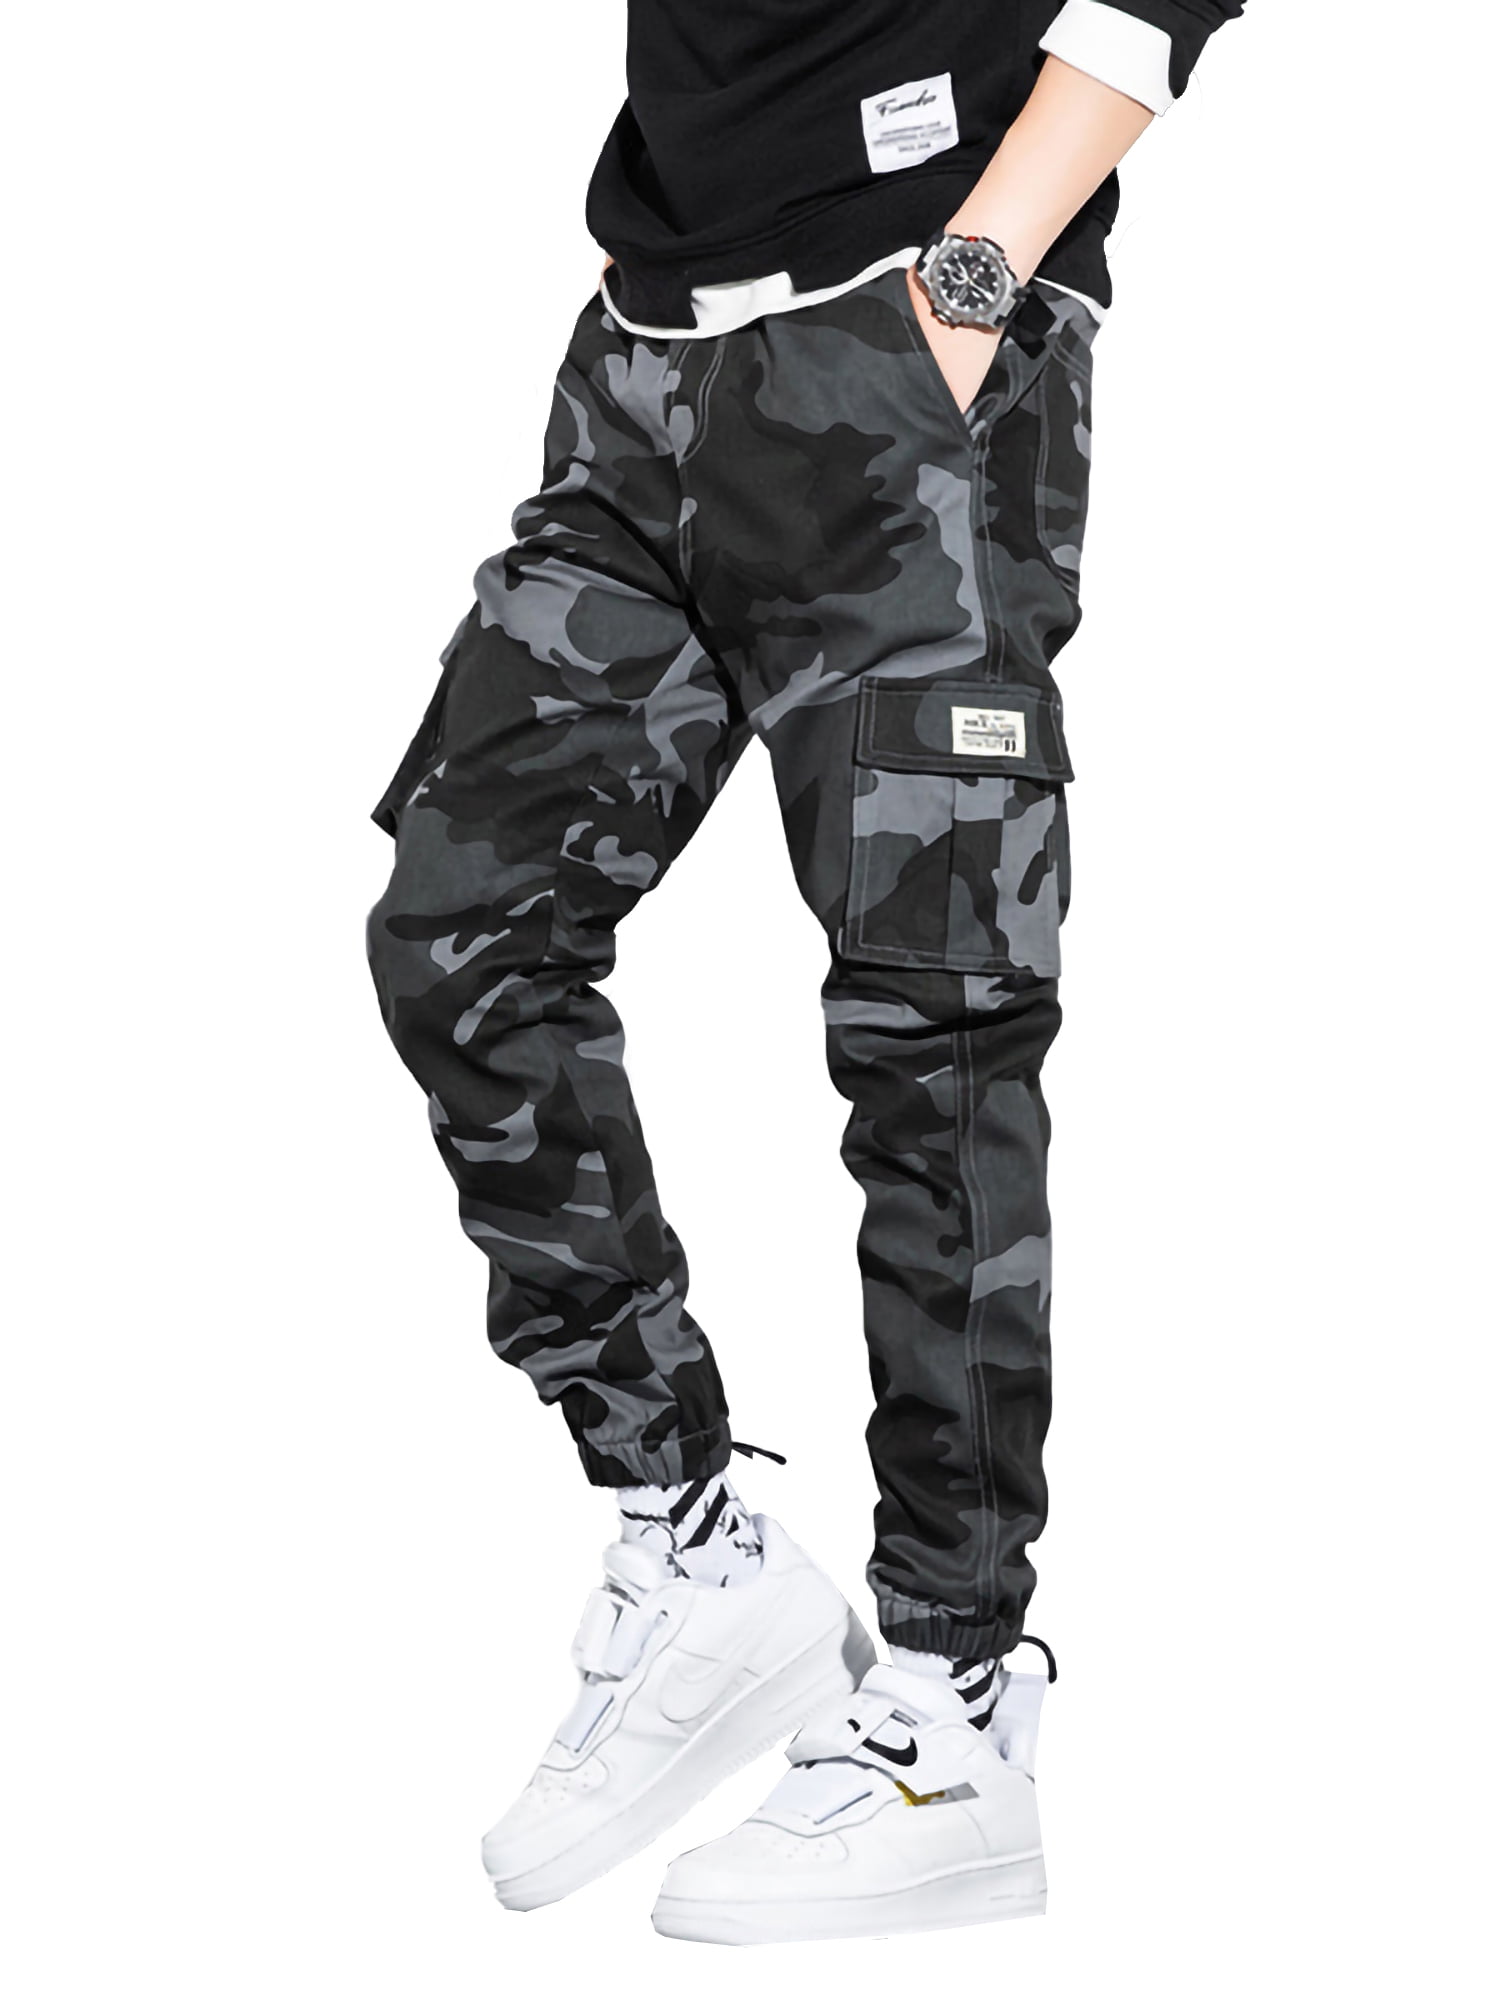 Men Overalls Hip-hop Street Korean Casual Camouflage Suspender Pants Trousers NW 